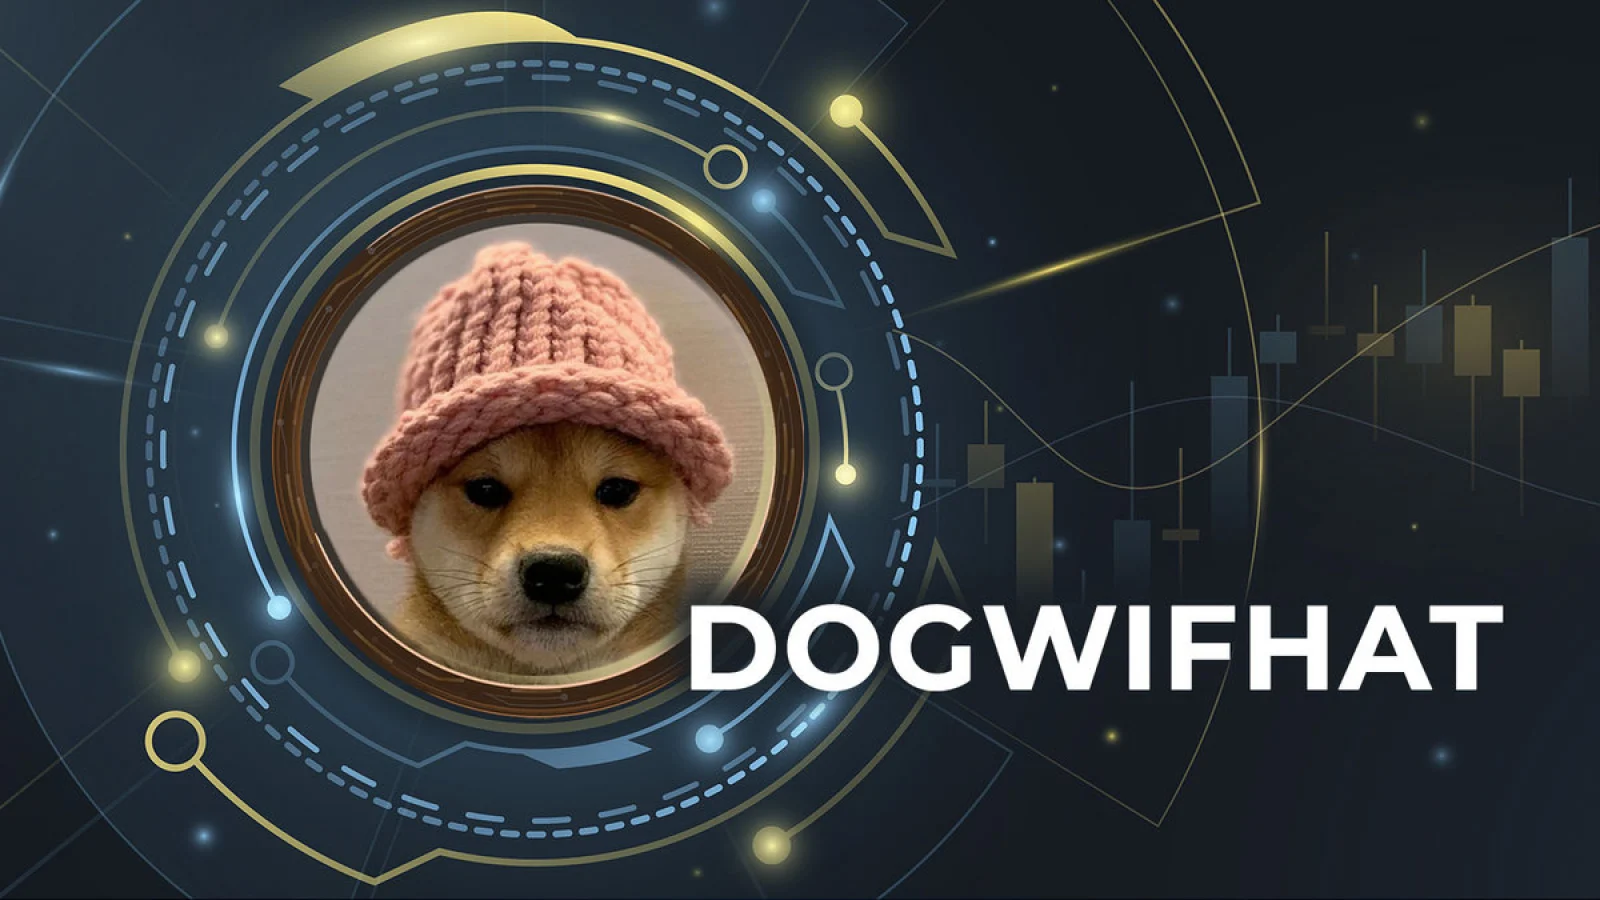 Dogwifhat The Solana Meme Coin That's Outpacing BONK and DOGE